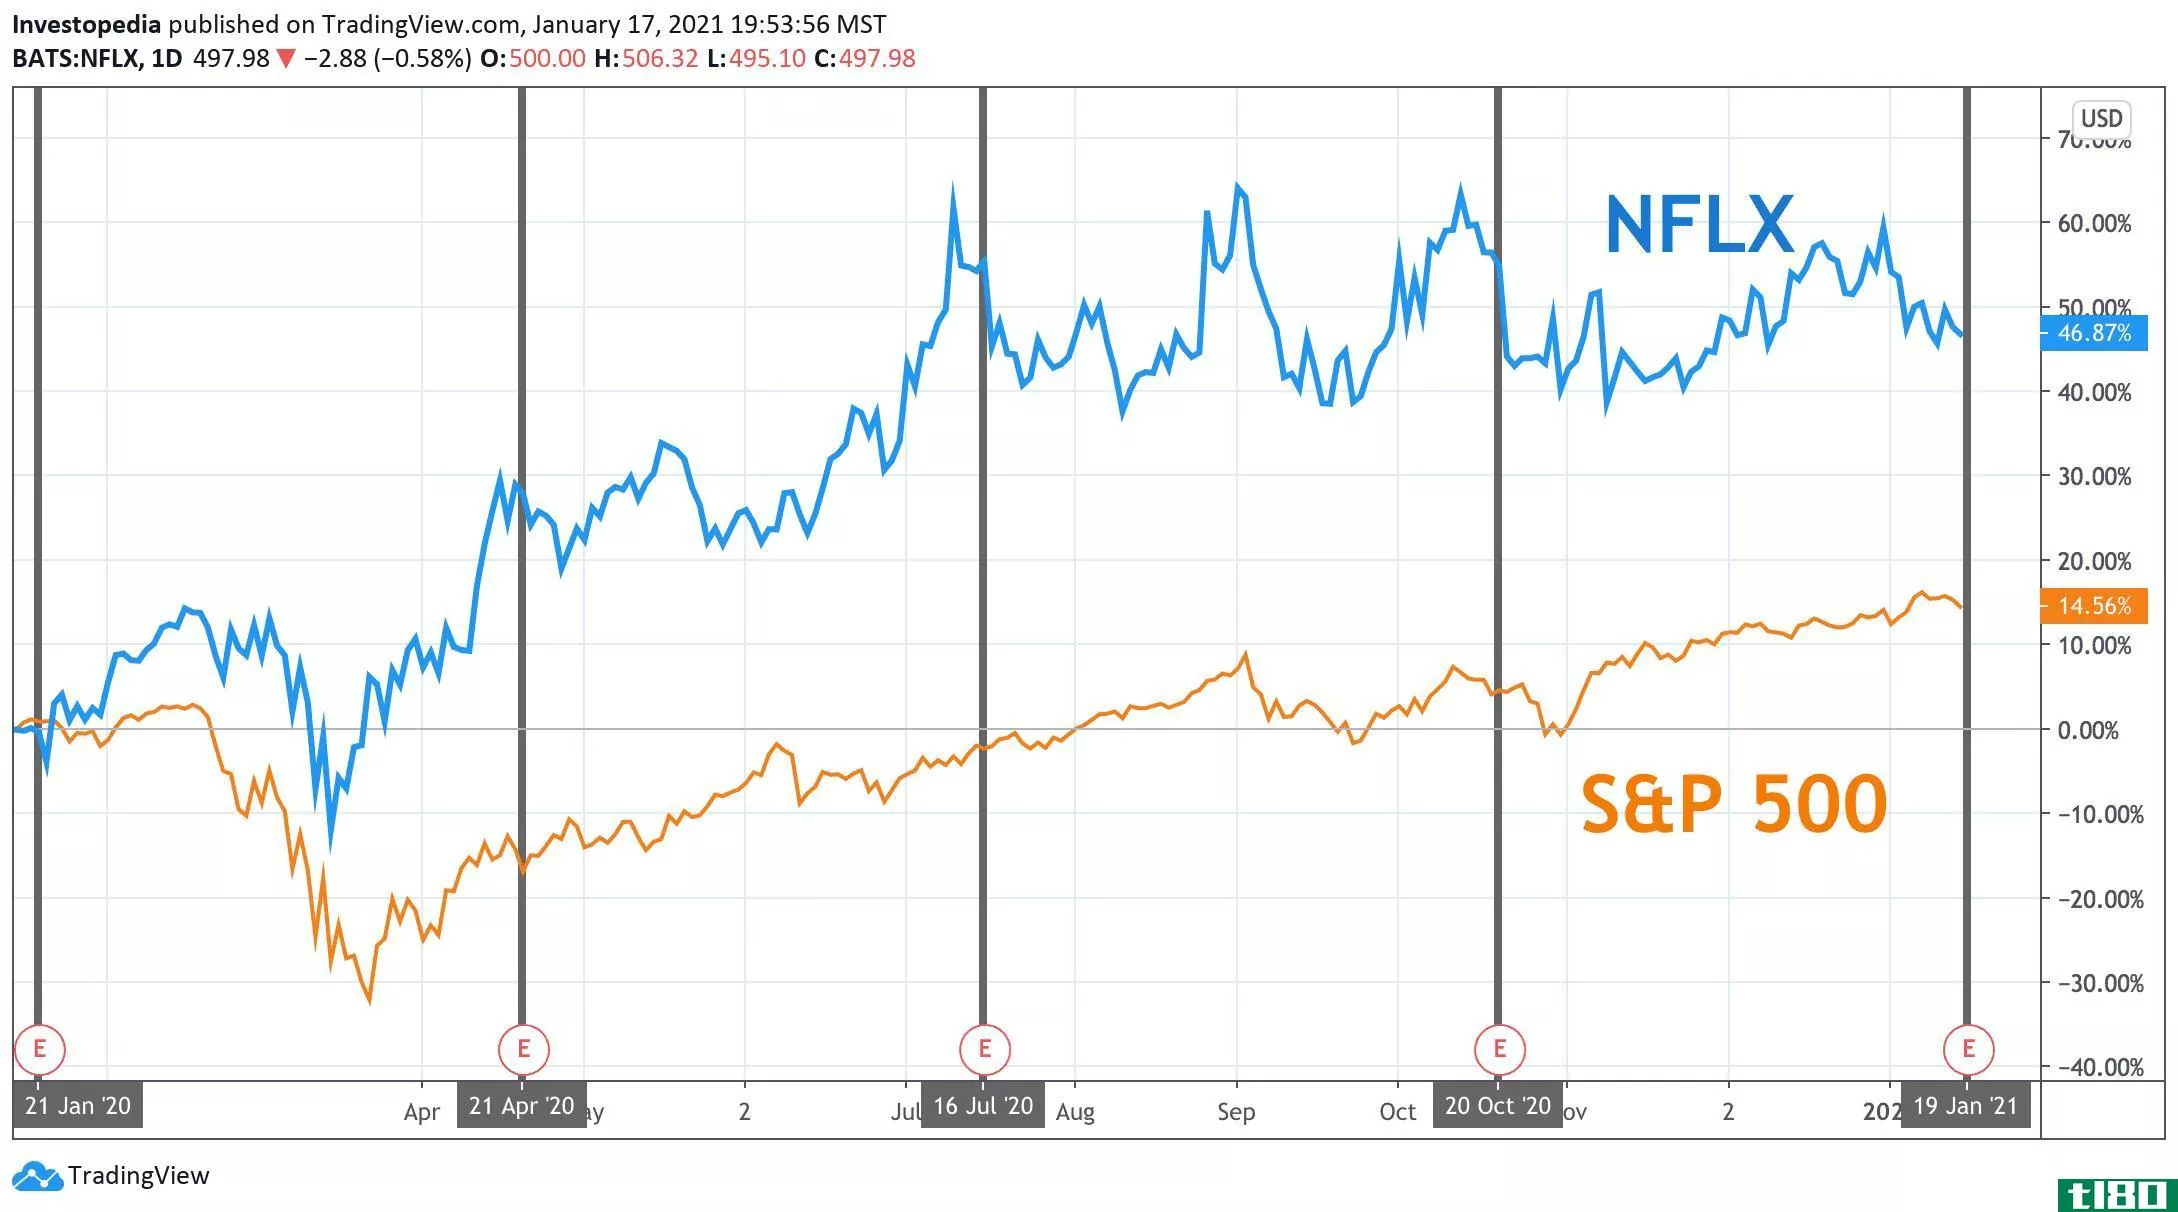 One Year Total Return for S&P 500 and Netflix